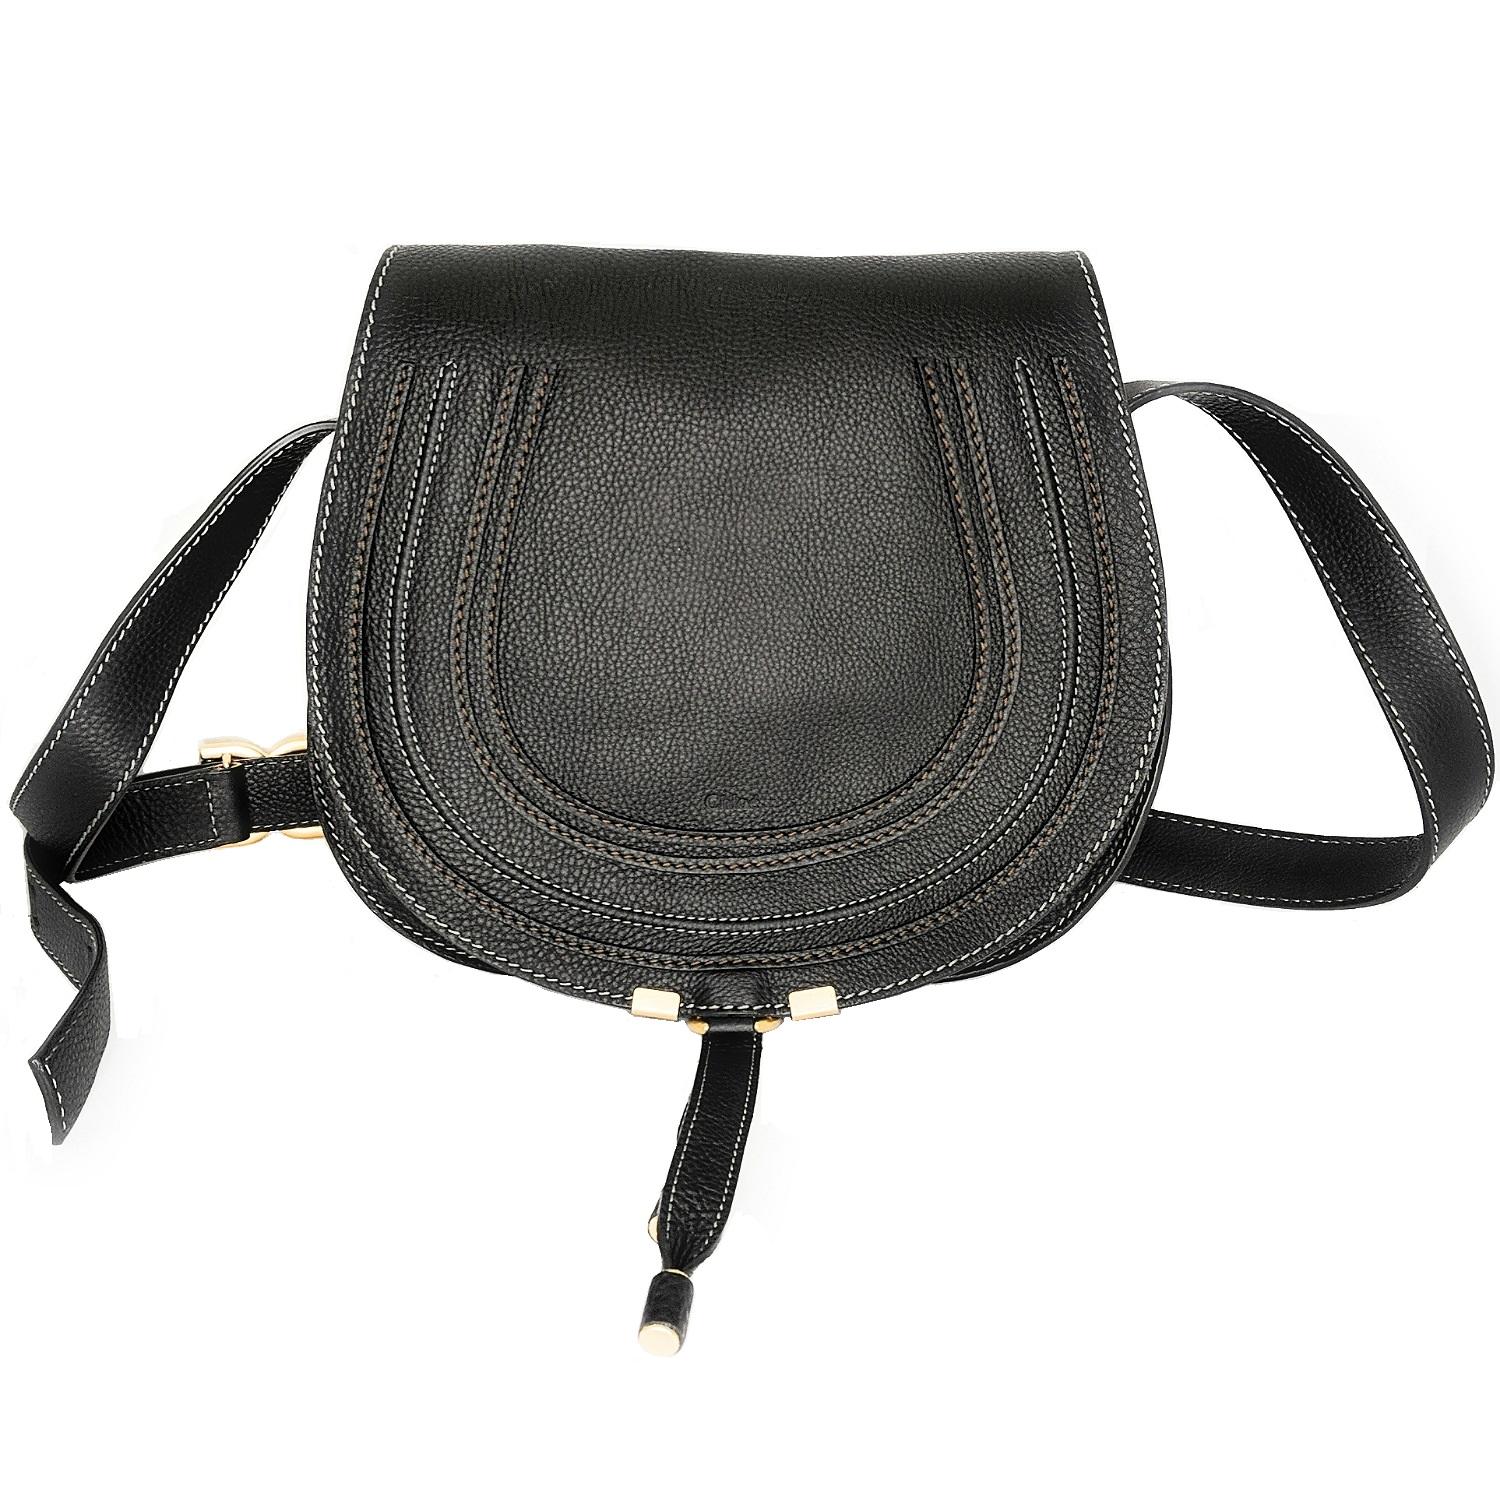 With its pintucked horseshoe flap, the Chloe Marcie saddle bag invites you to make your own luck. Pebbled leather adds supple texture to this convenient crossbody design. Current retail price is $1,490.

Designer: Chloe
Material: Pebbled calfskin